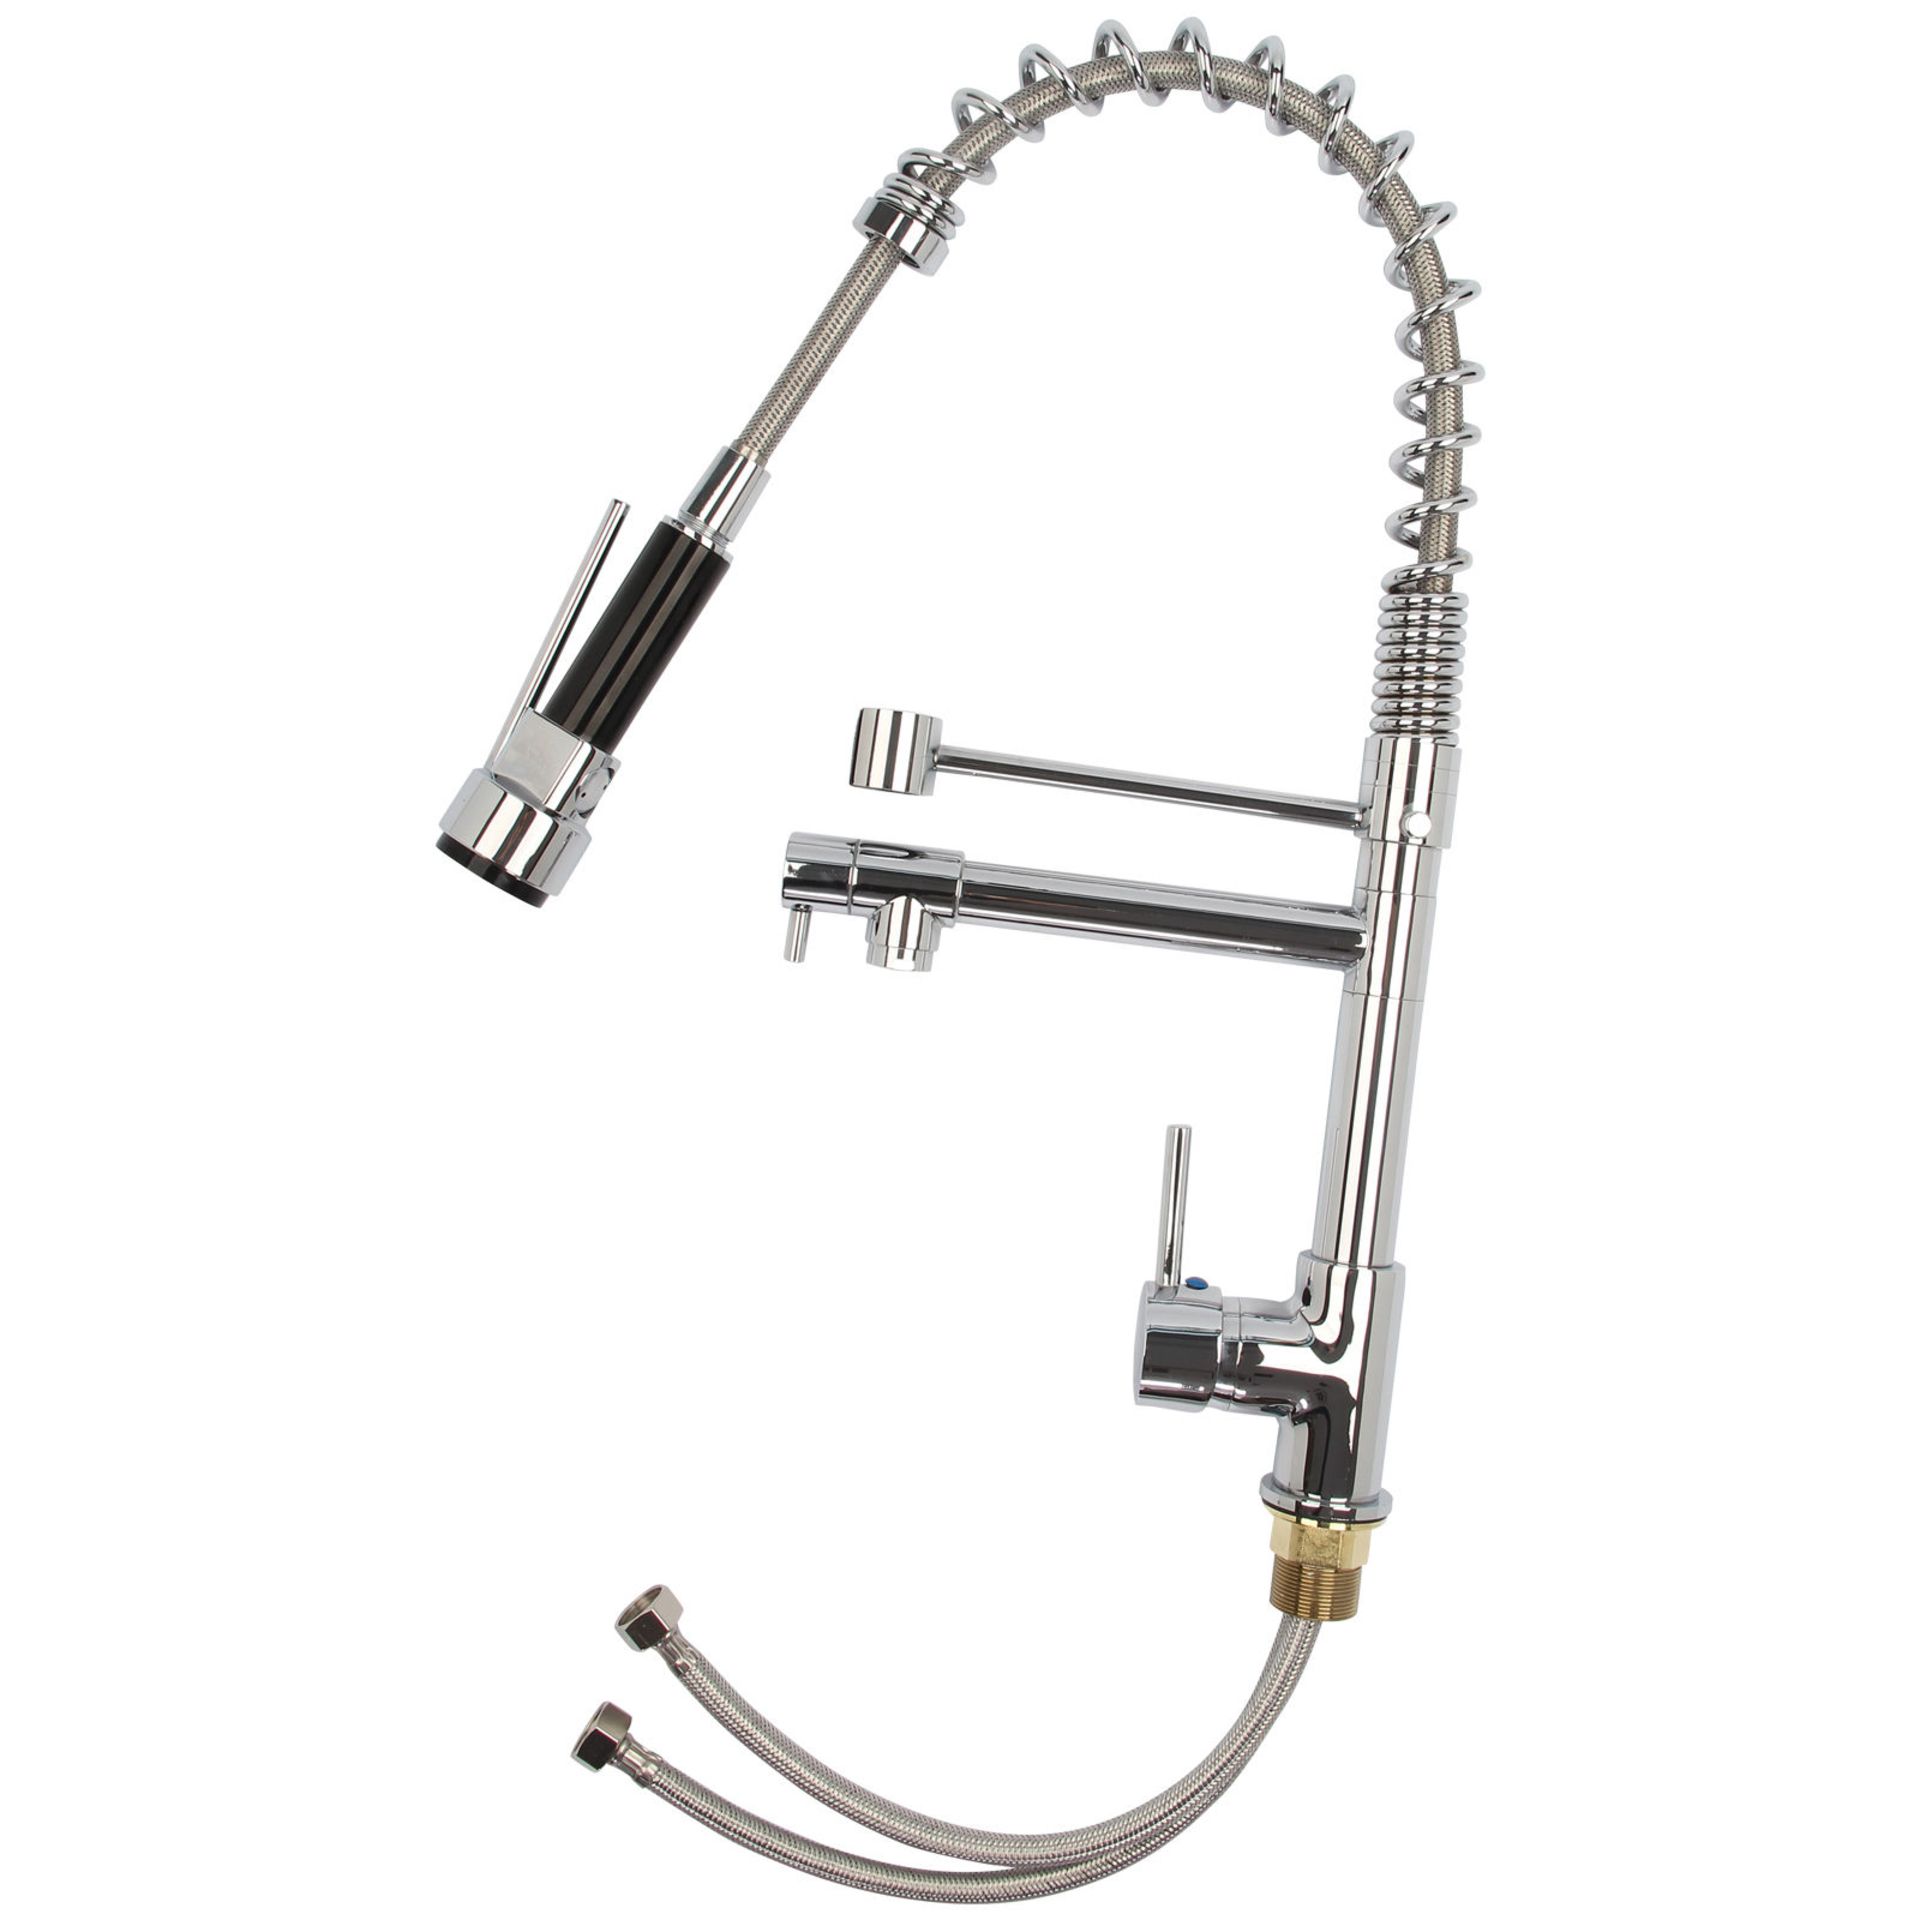 Bentley Modern Monobloc Chrome Brass Pull Out Spray Mixer Tap. RRP £349.99. This tap is from our - Image 2 of 4